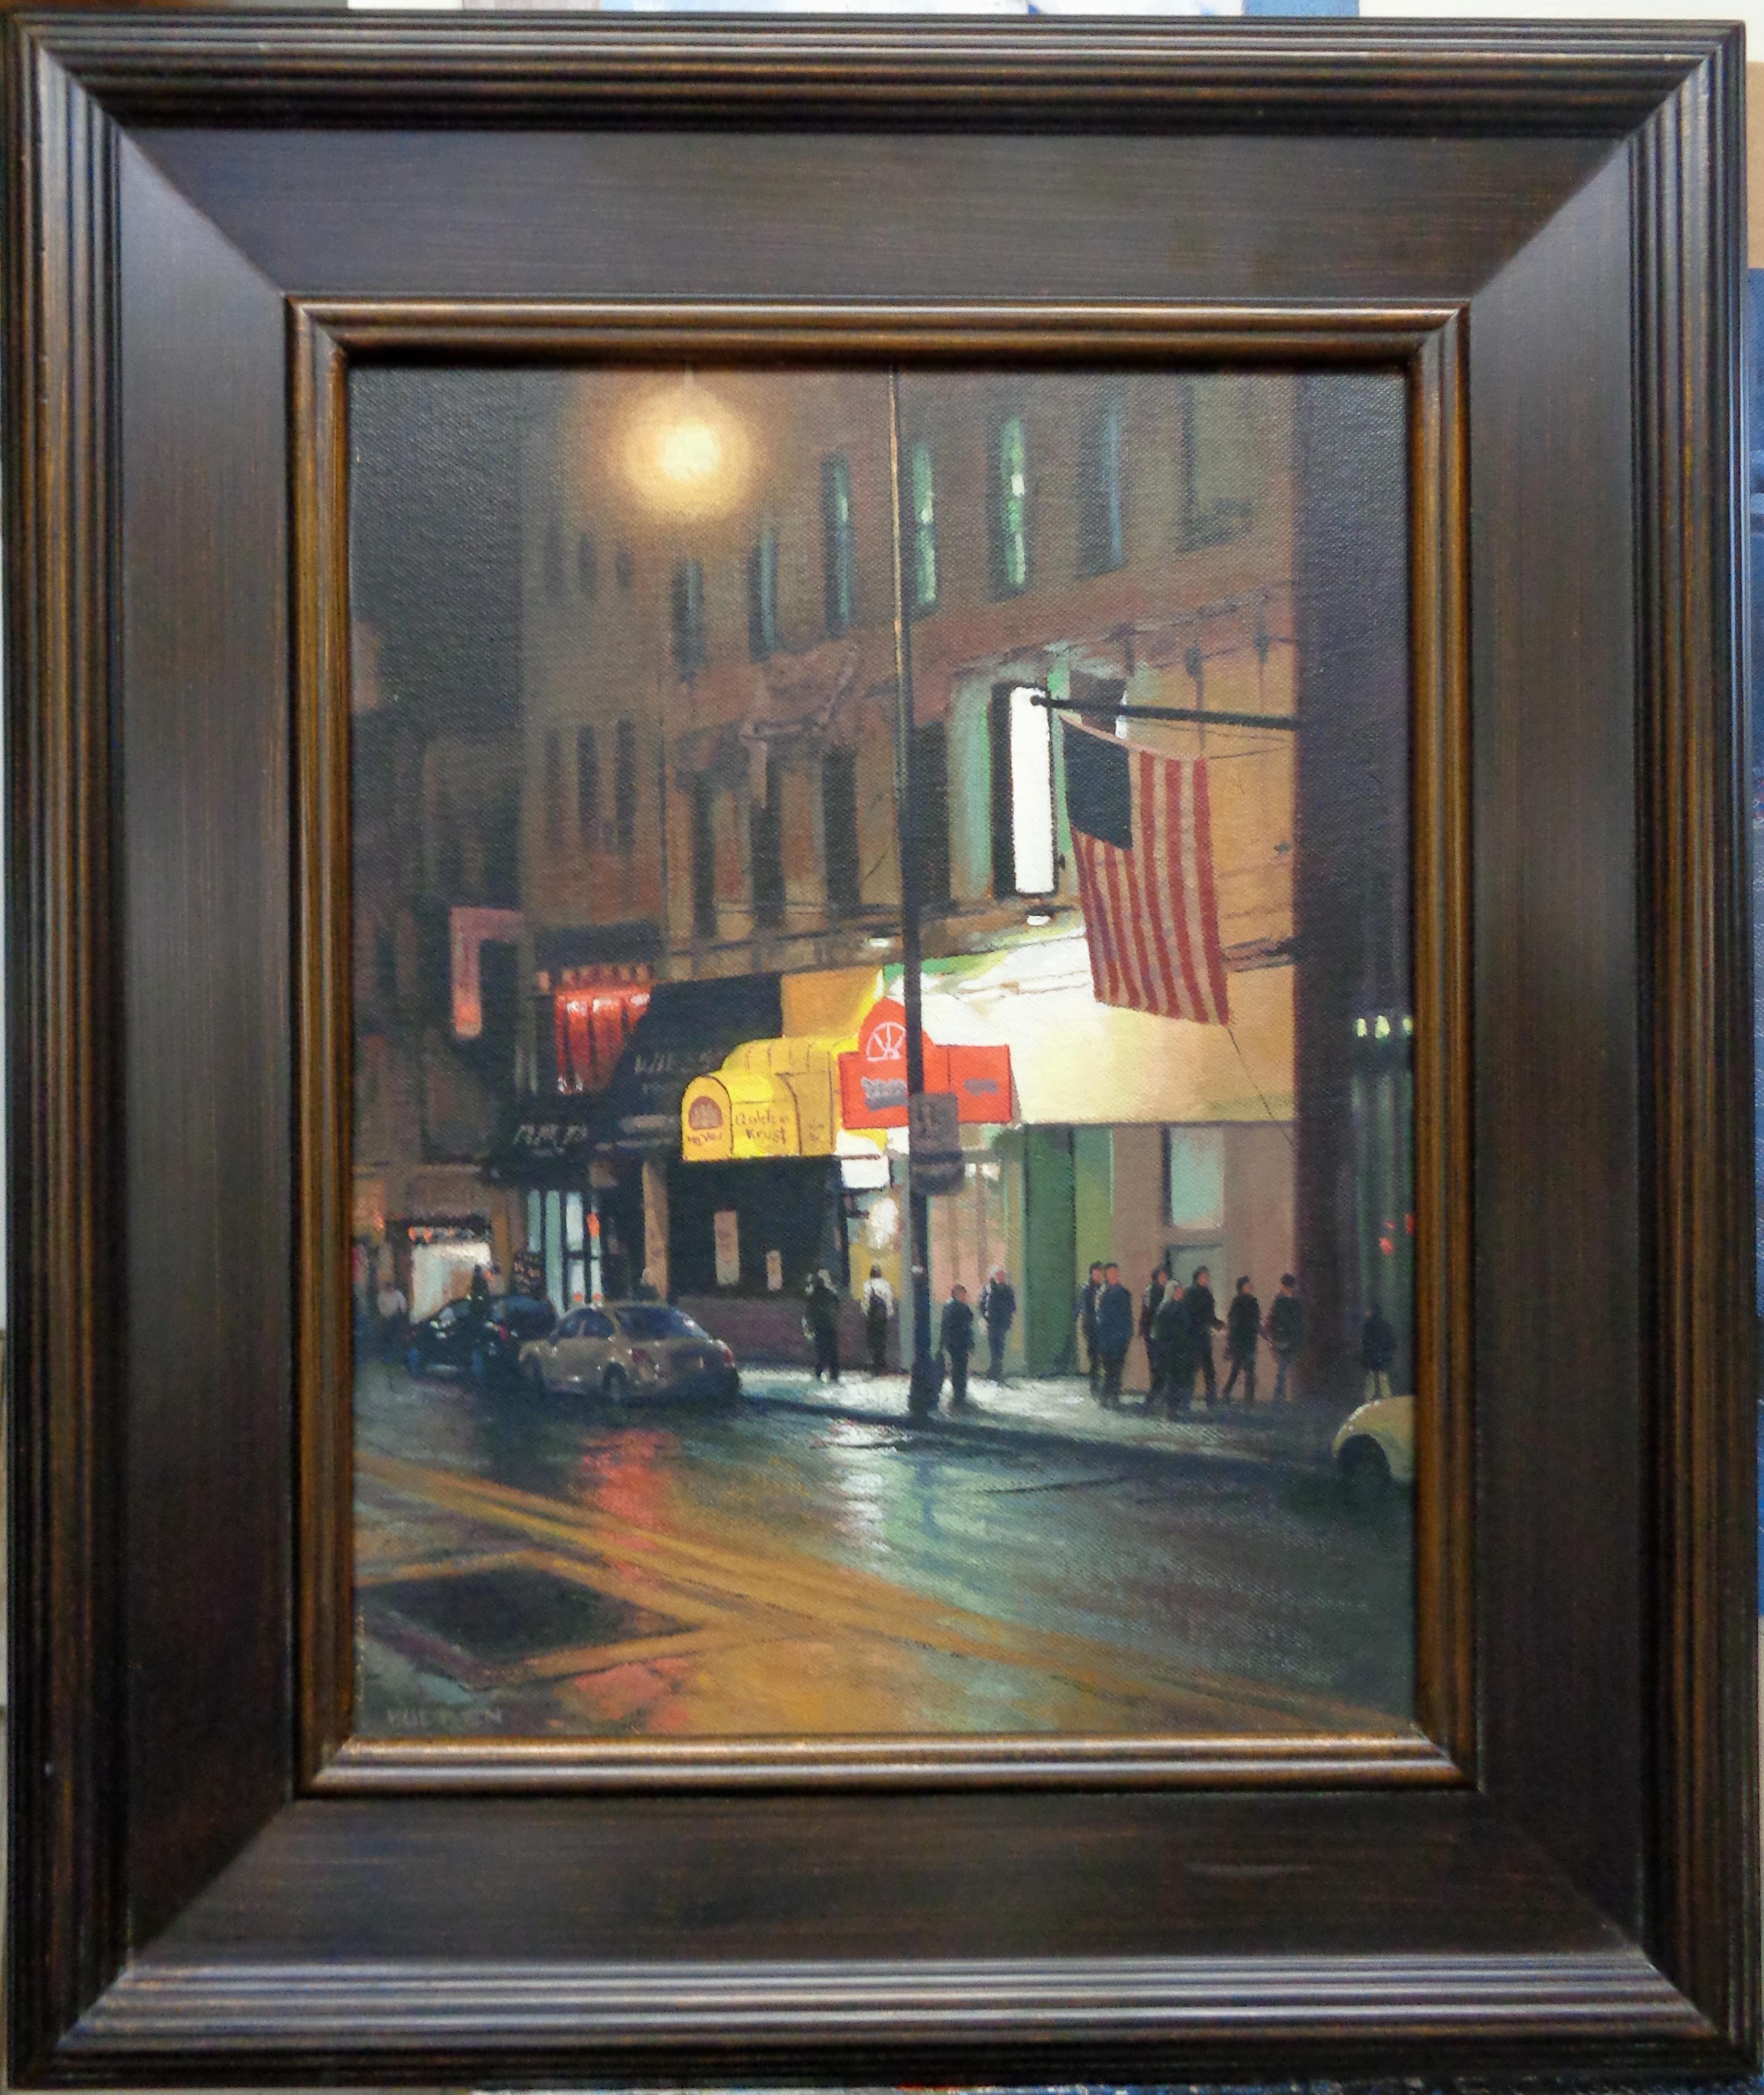 Night Life, NYC
oil/panel
14 x 11 image size
19.5 x 16.5 framed
An oil painting on canvas panel by award winning contemporary artist Michael Budden that showcases the bustling "Night Life" and the beautiful American Flag on a NYC evening.  Artist